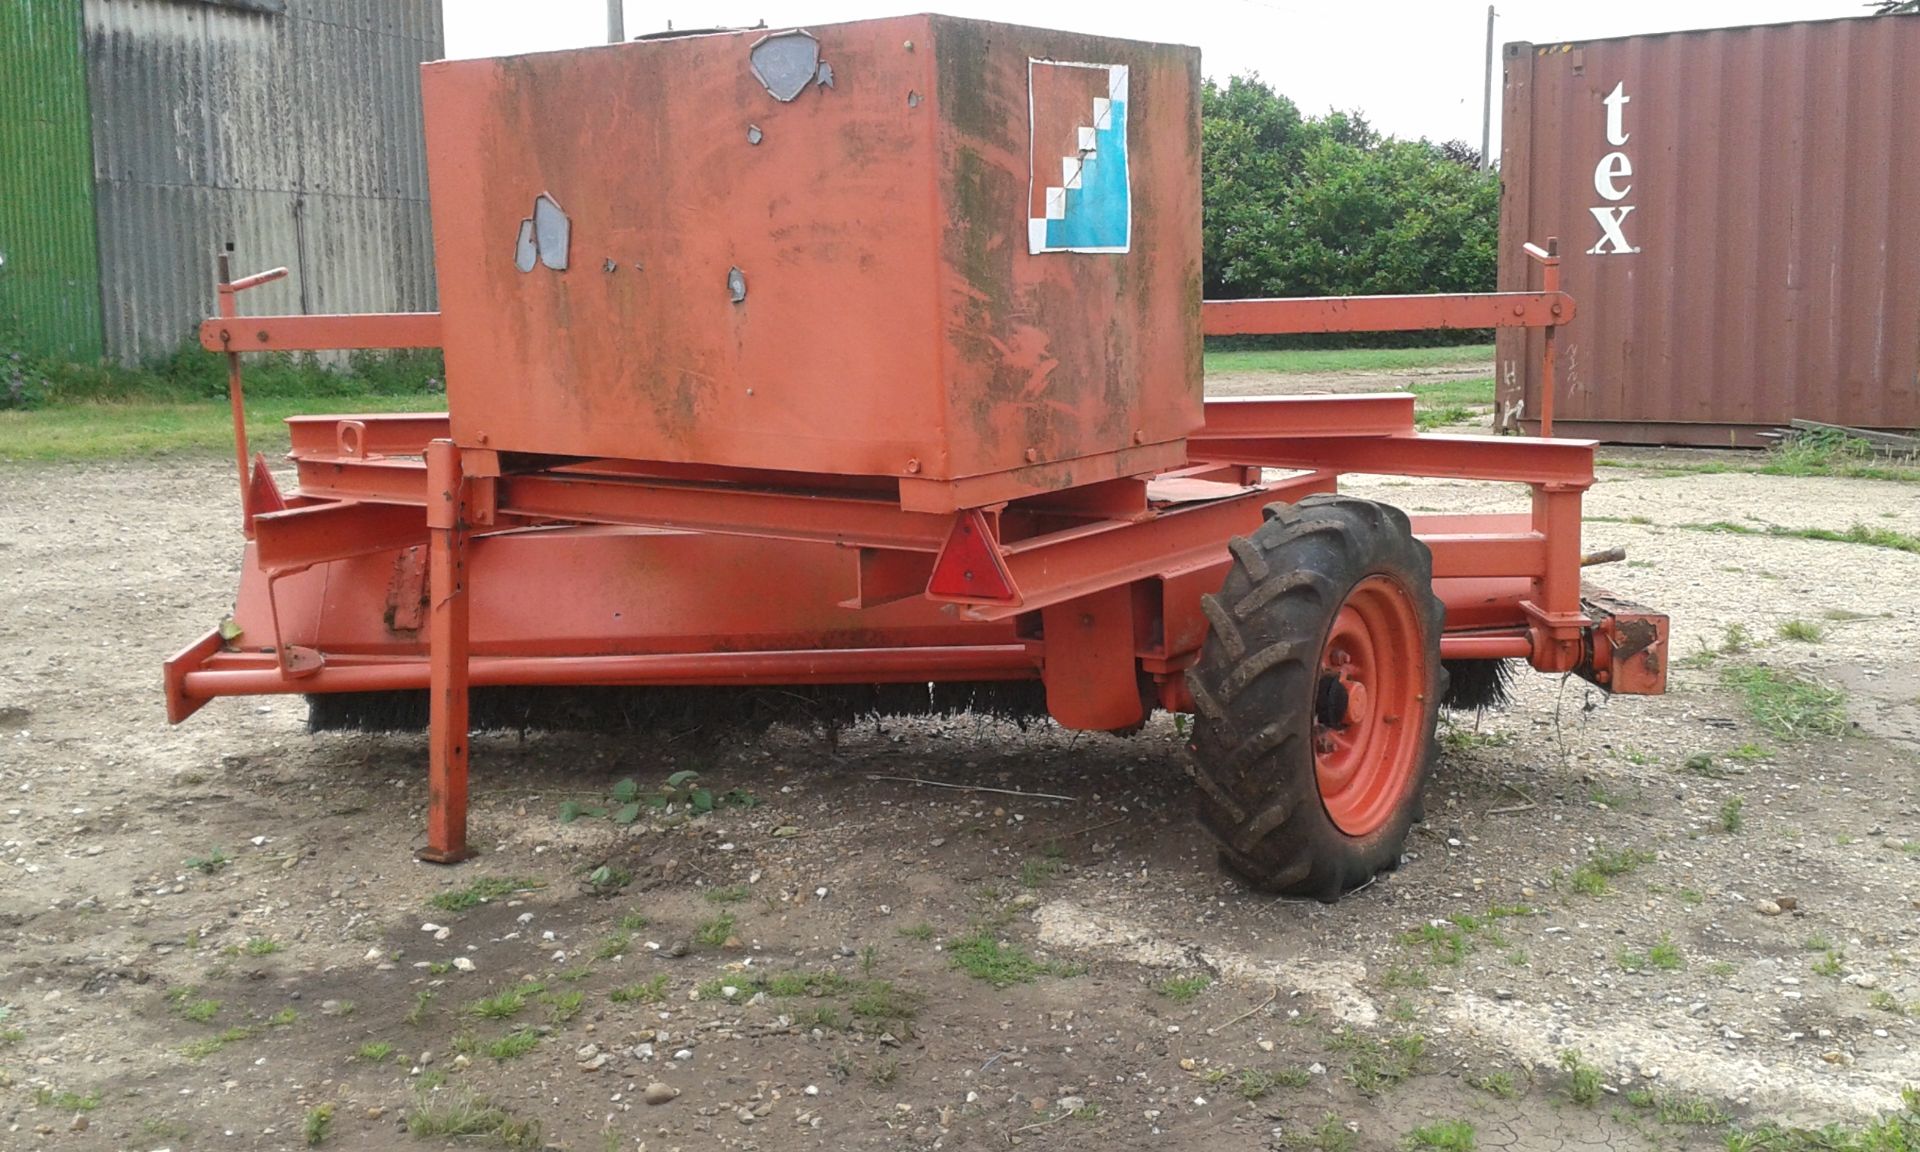 Towed Road Brush, Land Wheel Drive c/w dust suppression water tank - Location - Waterbeach, Cambs - Image 2 of 2